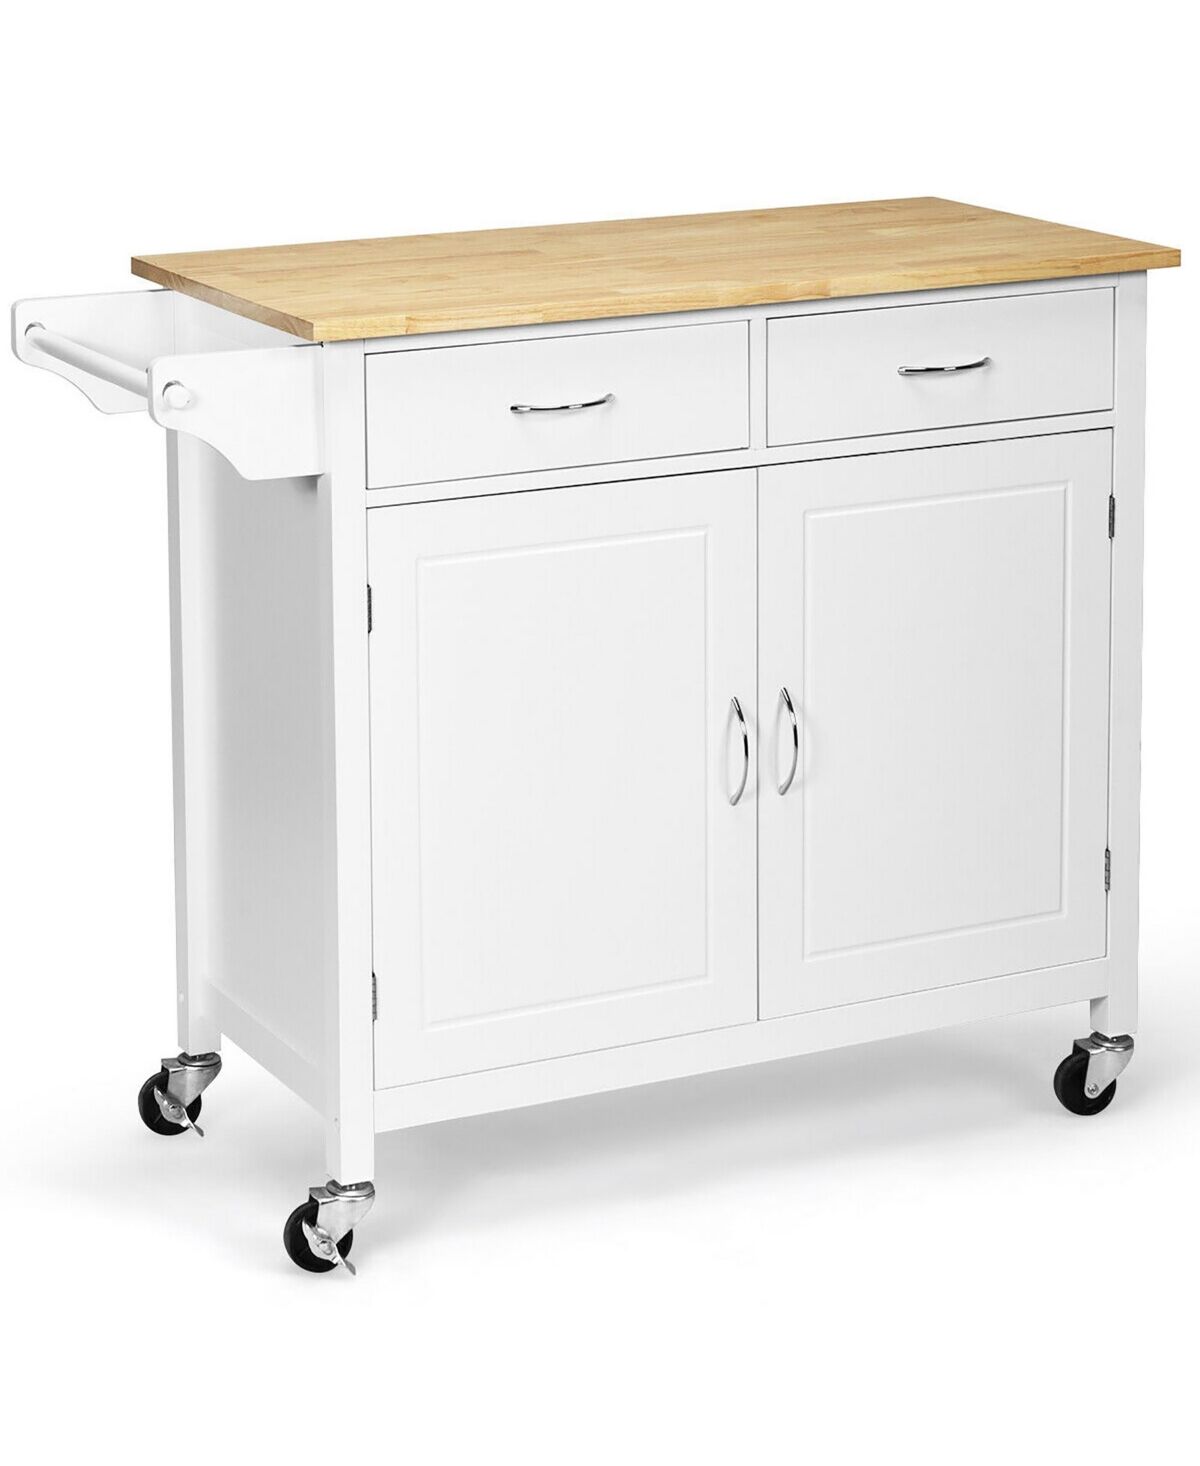 Costway Modern Rolling Kitchen Cart Island Wood Top Storage Trolley Cabinet Utility New White - White